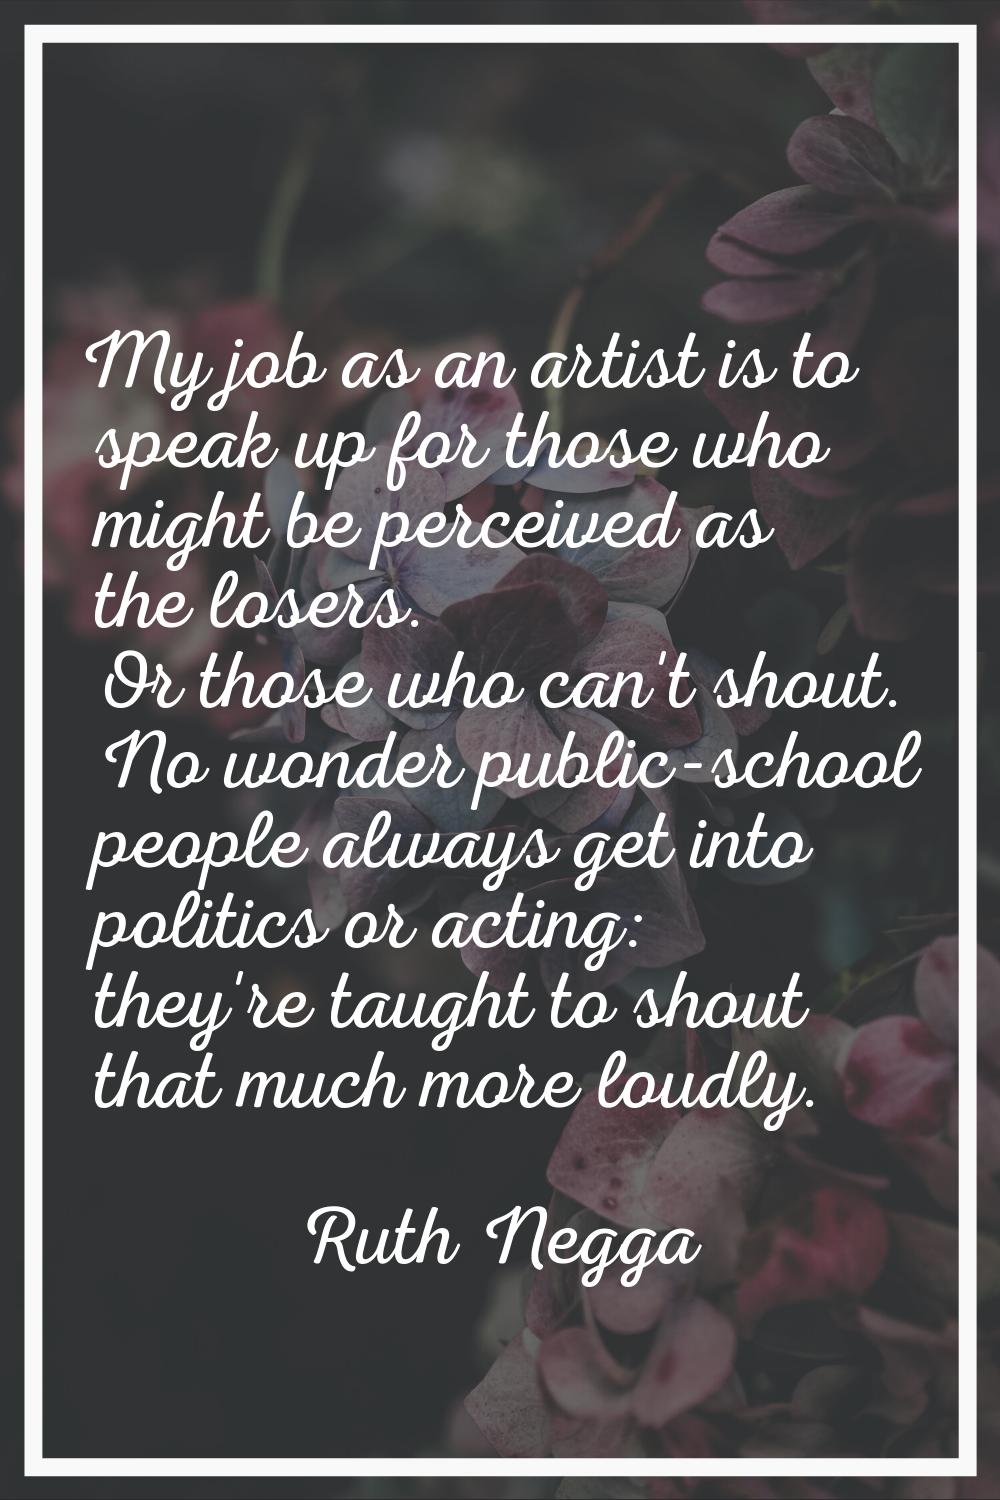 My job as an artist is to speak up for those who might be perceived as the losers. Or those who can